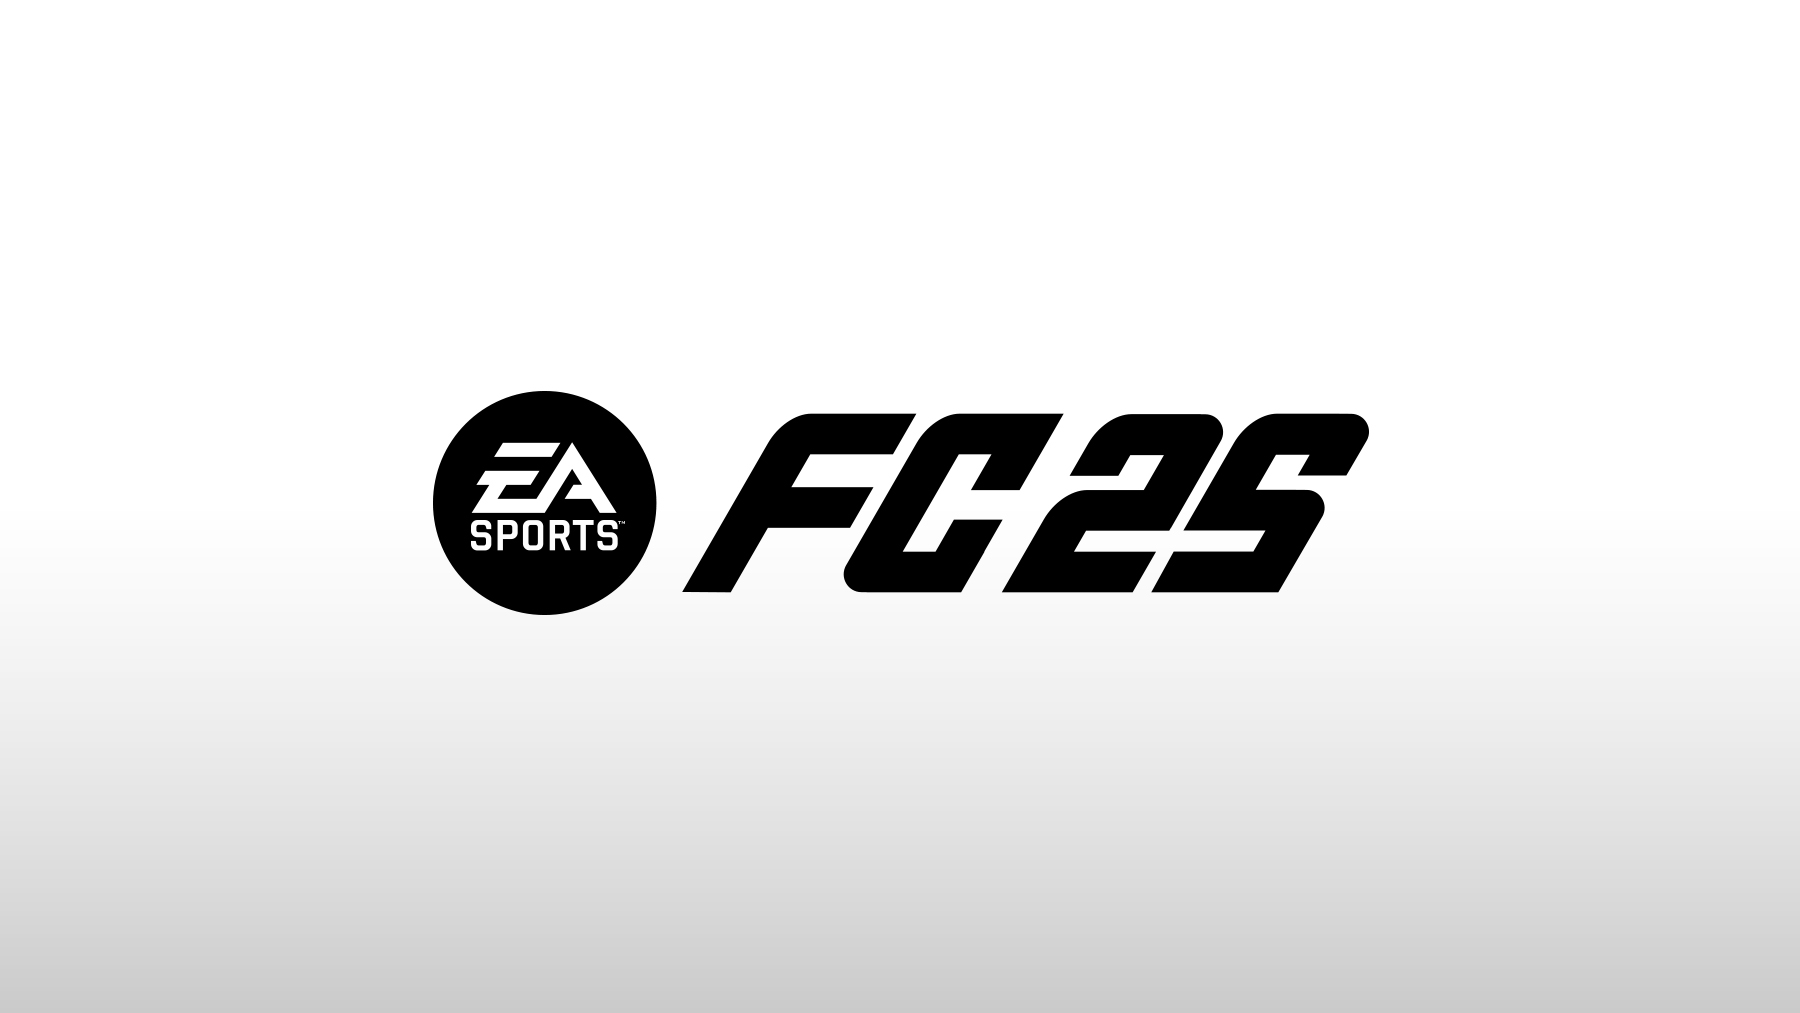 EA Sports FC 25 Logo - Download high-resolution FC official logo in PNG file format.